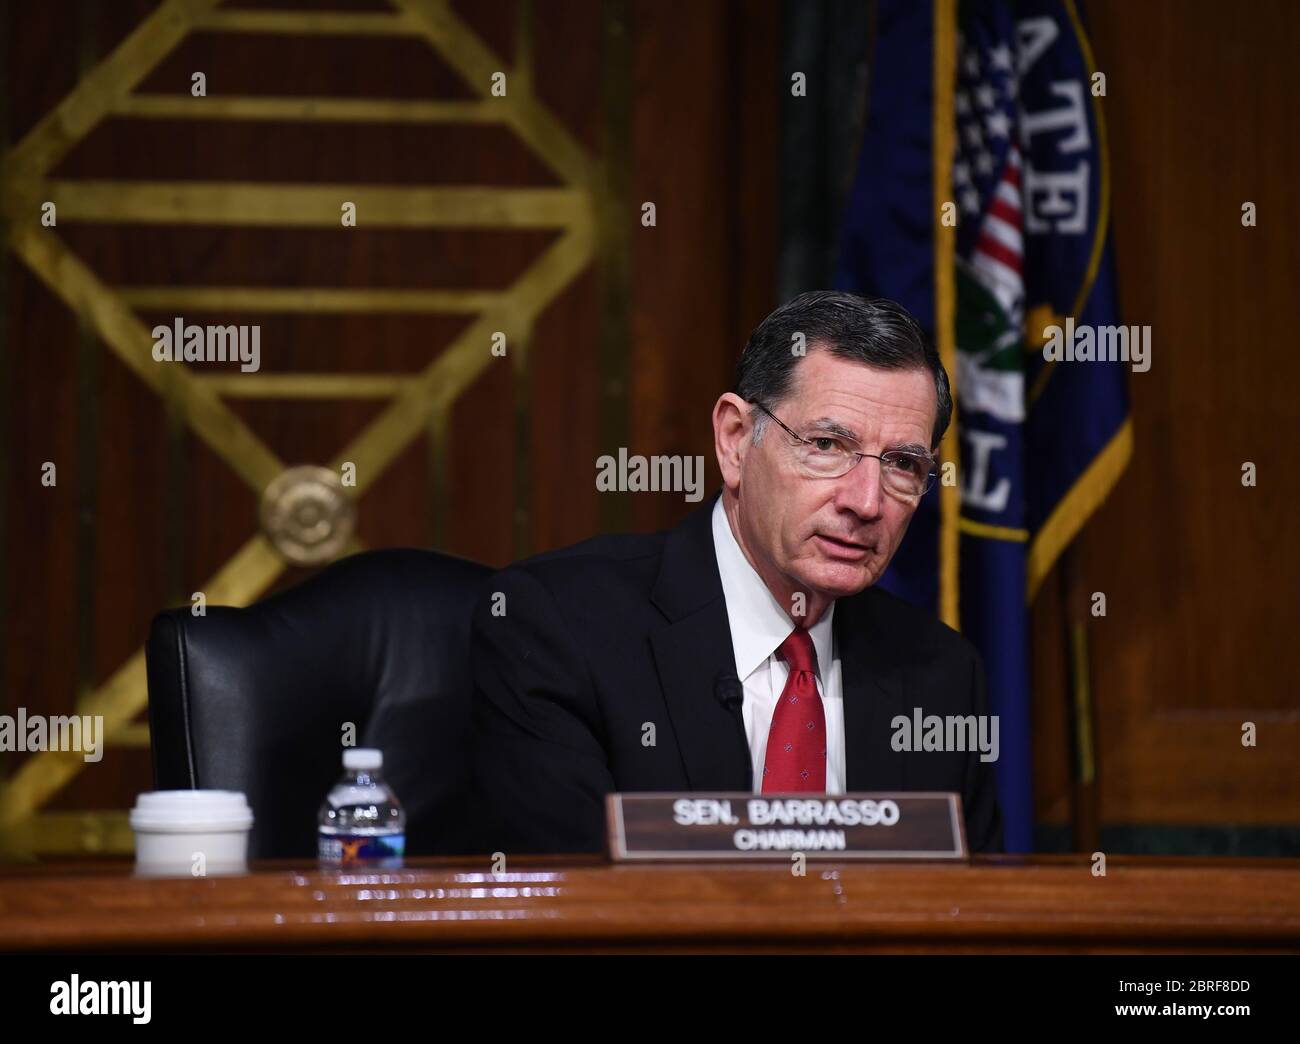 United States Senator John Barrasso (Republican of Wyoming) listens to opening remarks at a hearing titled "Oversight of the Environmental Protection Agency" in the Dirksen Senate Office Building on May 20, 2020 in Washington, DC. Andrew Wheeler, Administrator, United States Environmental Protection Agency (EPA) will be asked about the rollback of regulations by the Environment Protection Agency since the pandemic started in March. Credit: Kevin Dietsch/Pool via CNP /MediaPunch Stock Photo